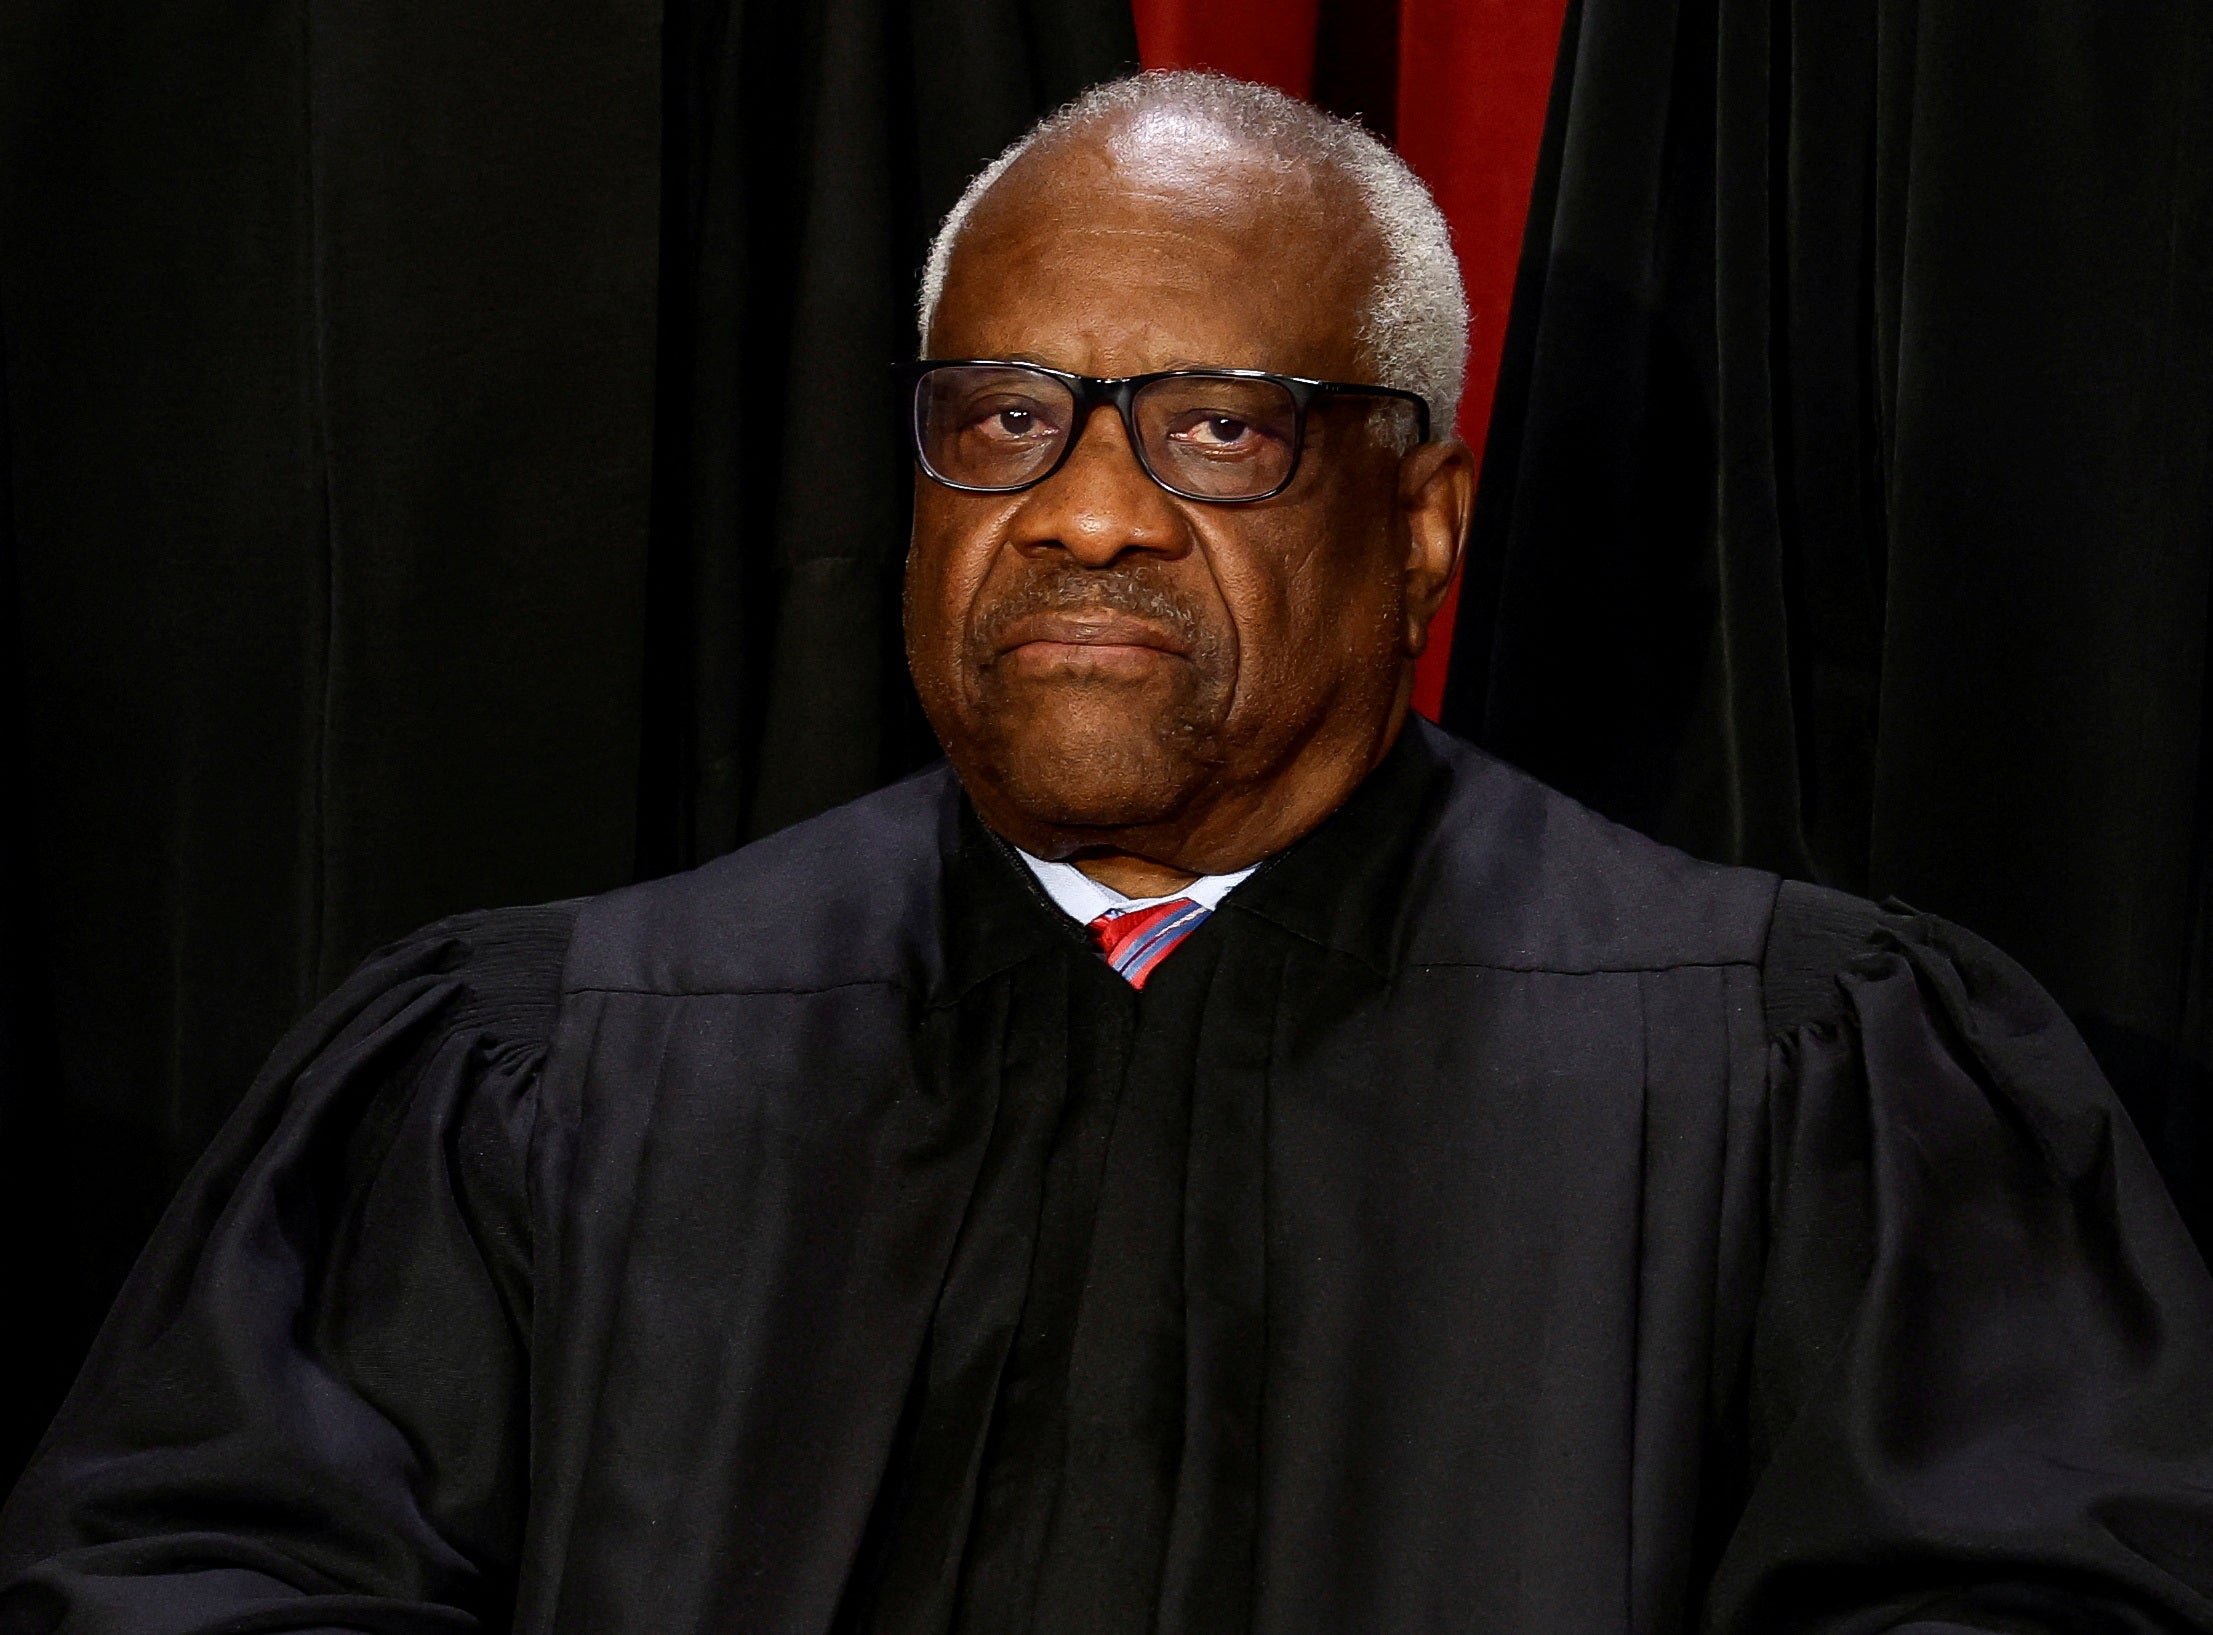 Justice Clarence Thomas wrote a concurring opinion in Donald Trump’s immunity case that takes aim at special counsel Jack Smith.